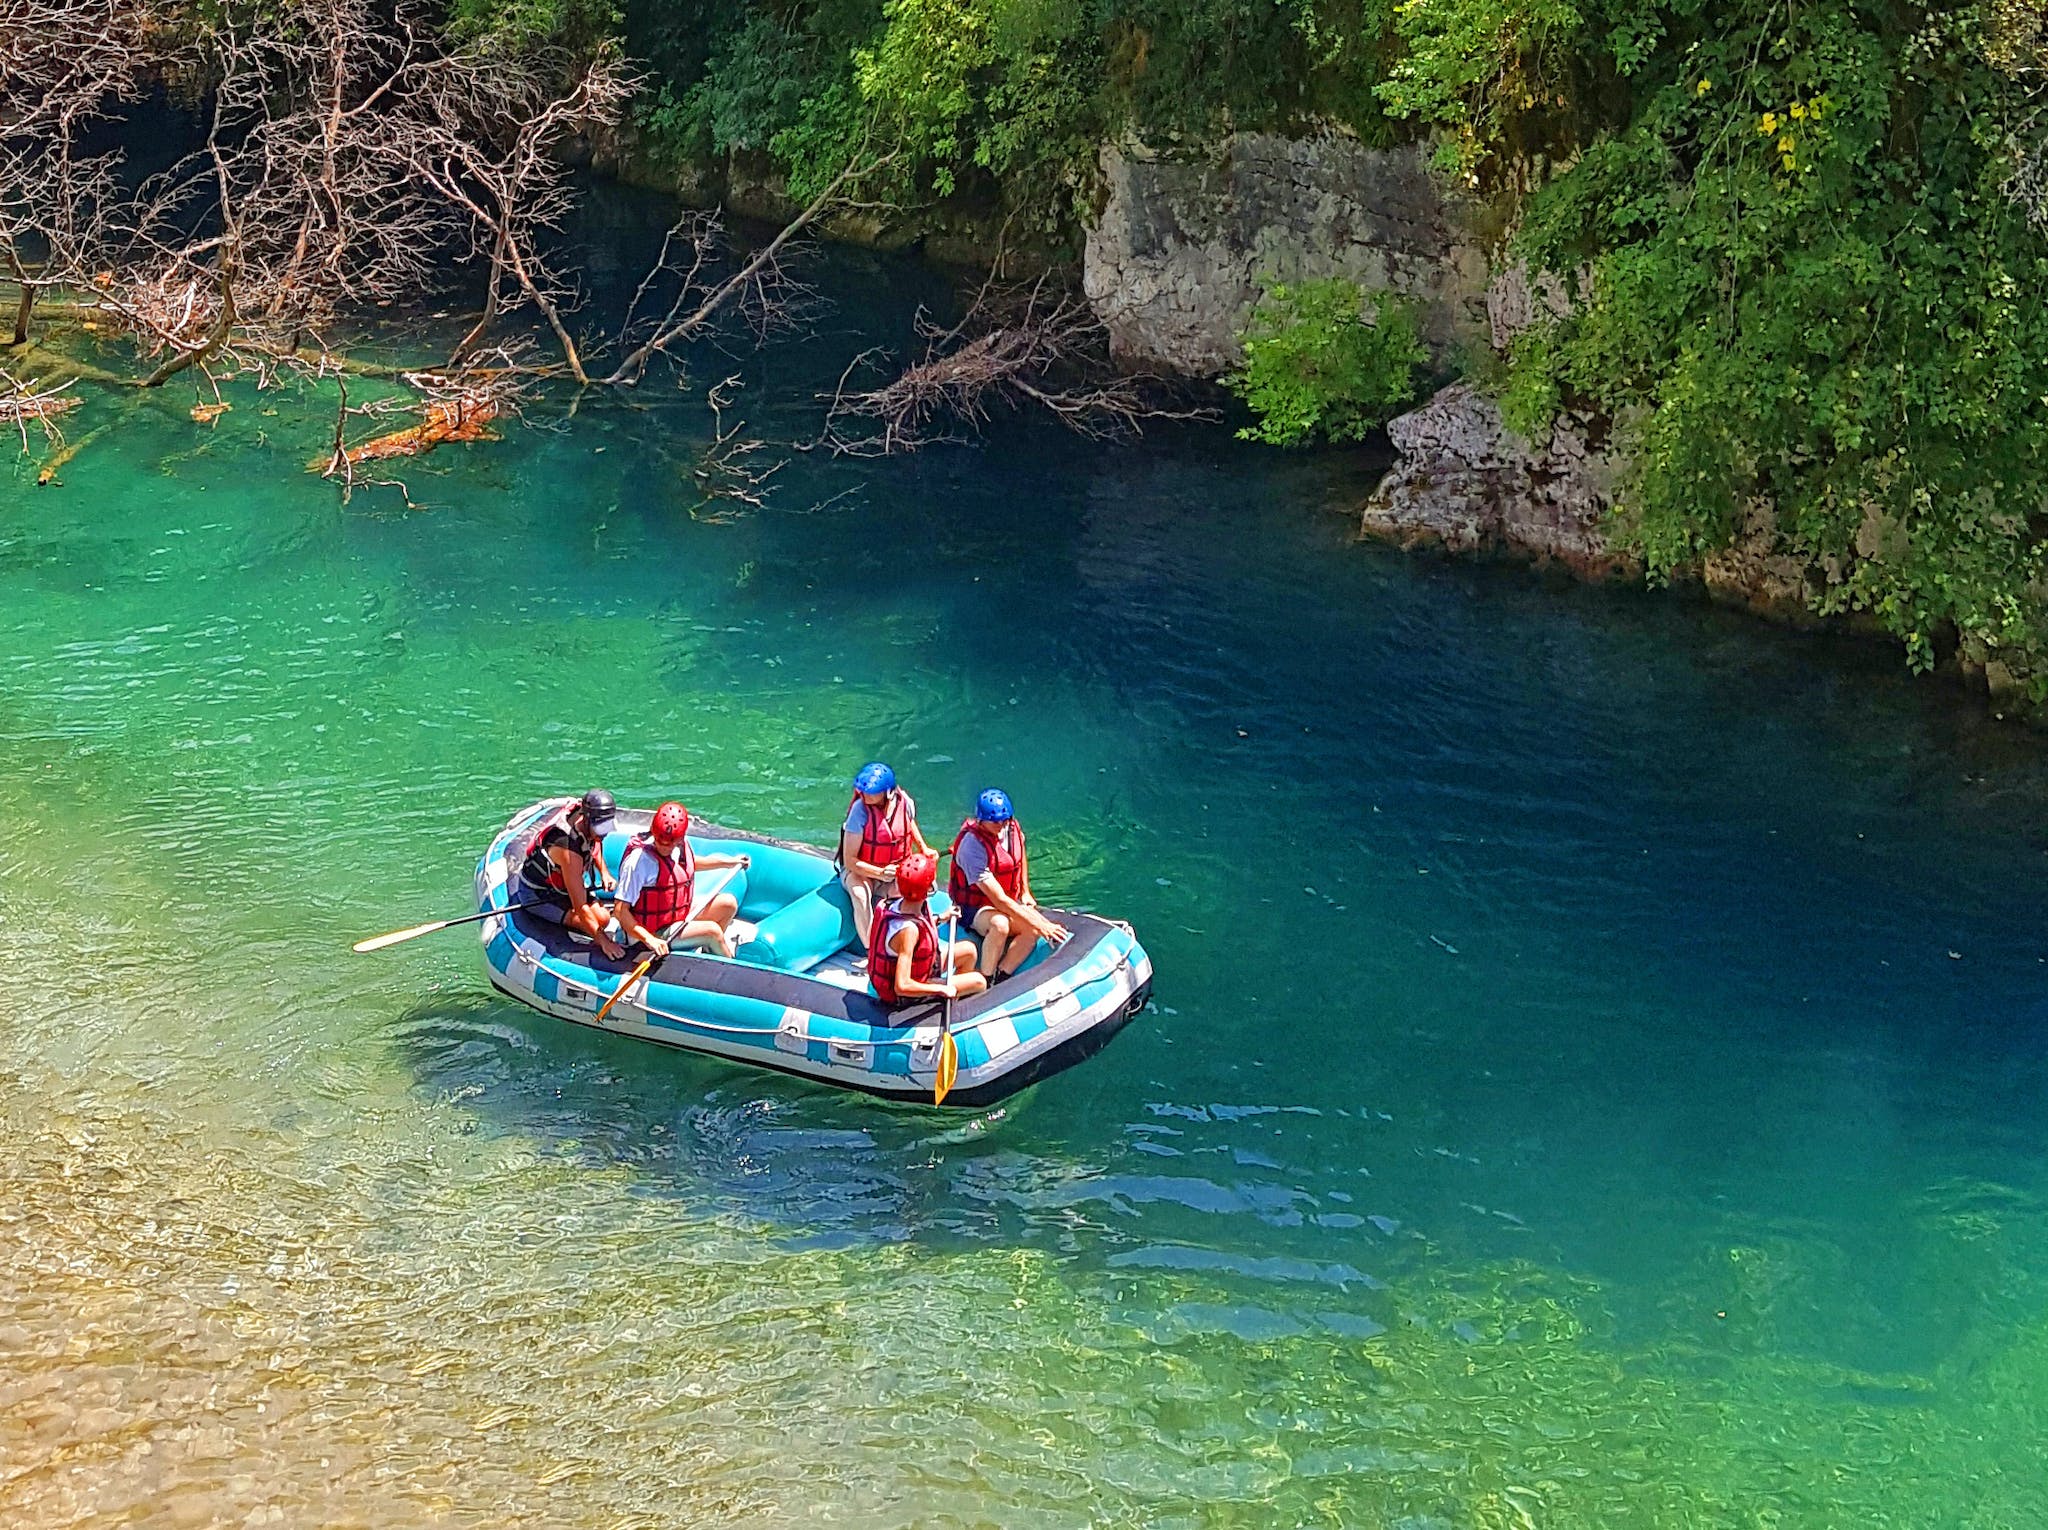 Rafting on the clear waters of Voidomatis River, in Greece's Zagori Region